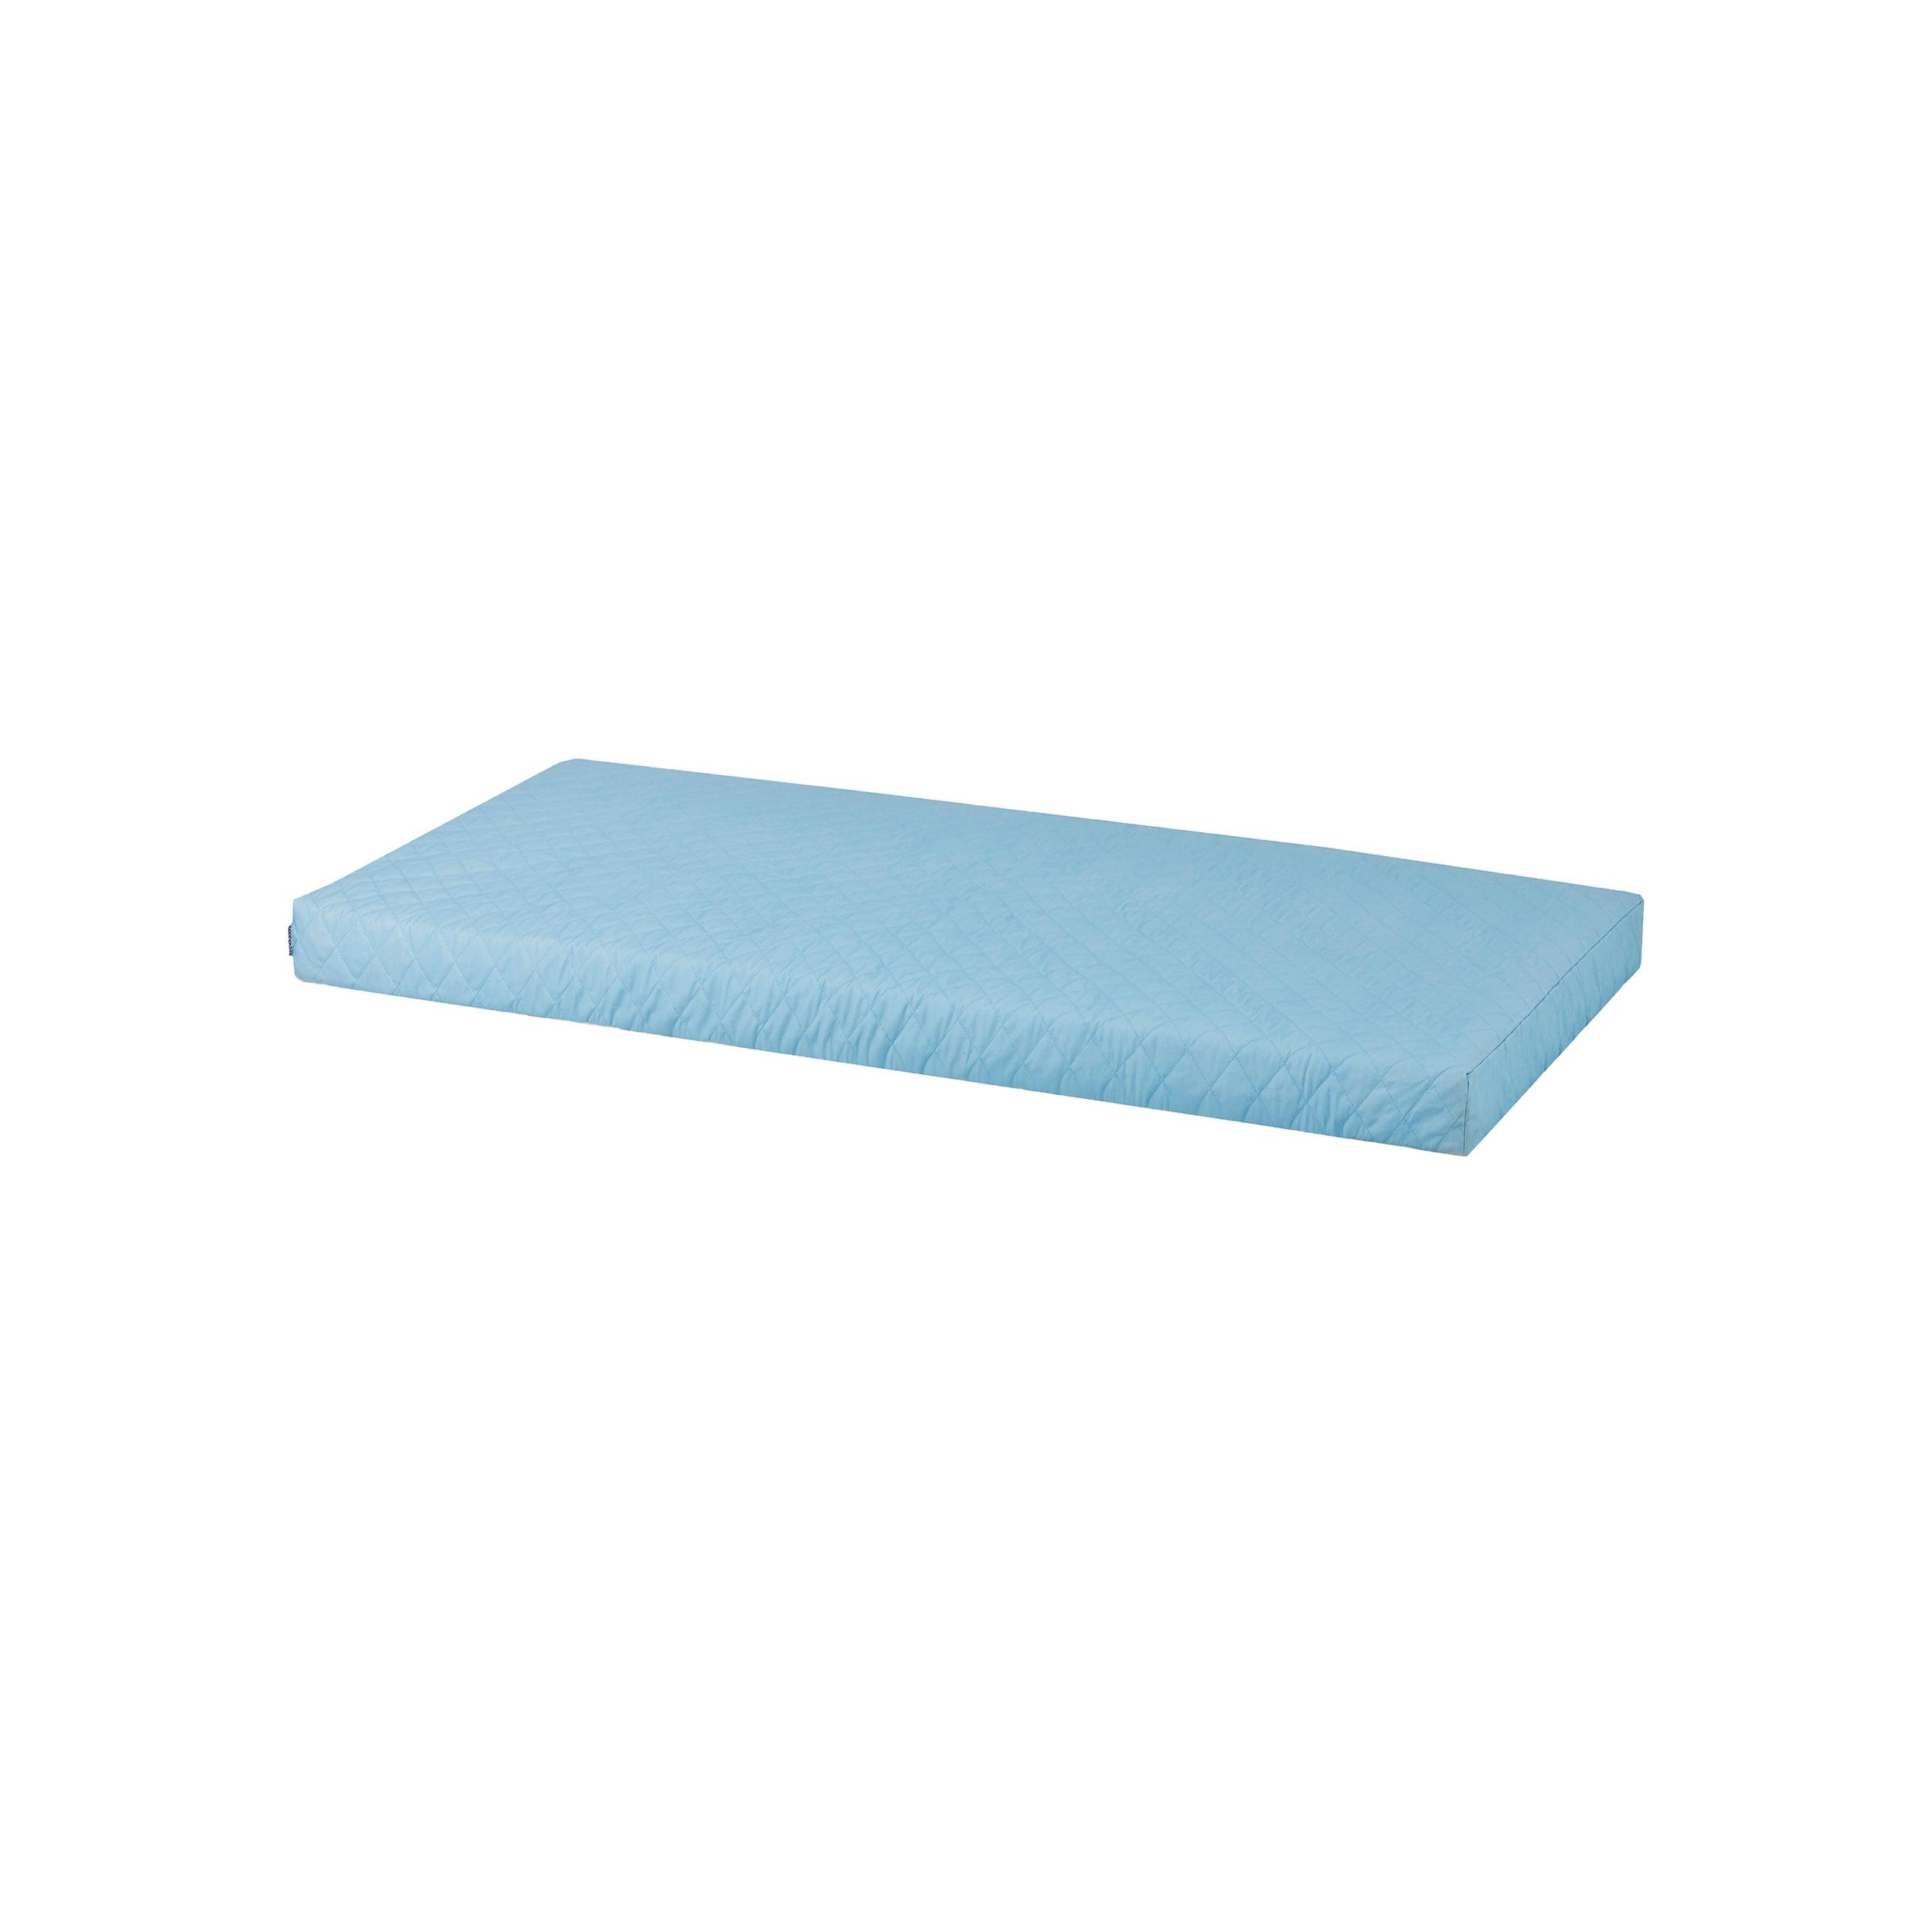 Hoppekids cold foam mattress including quilted cover